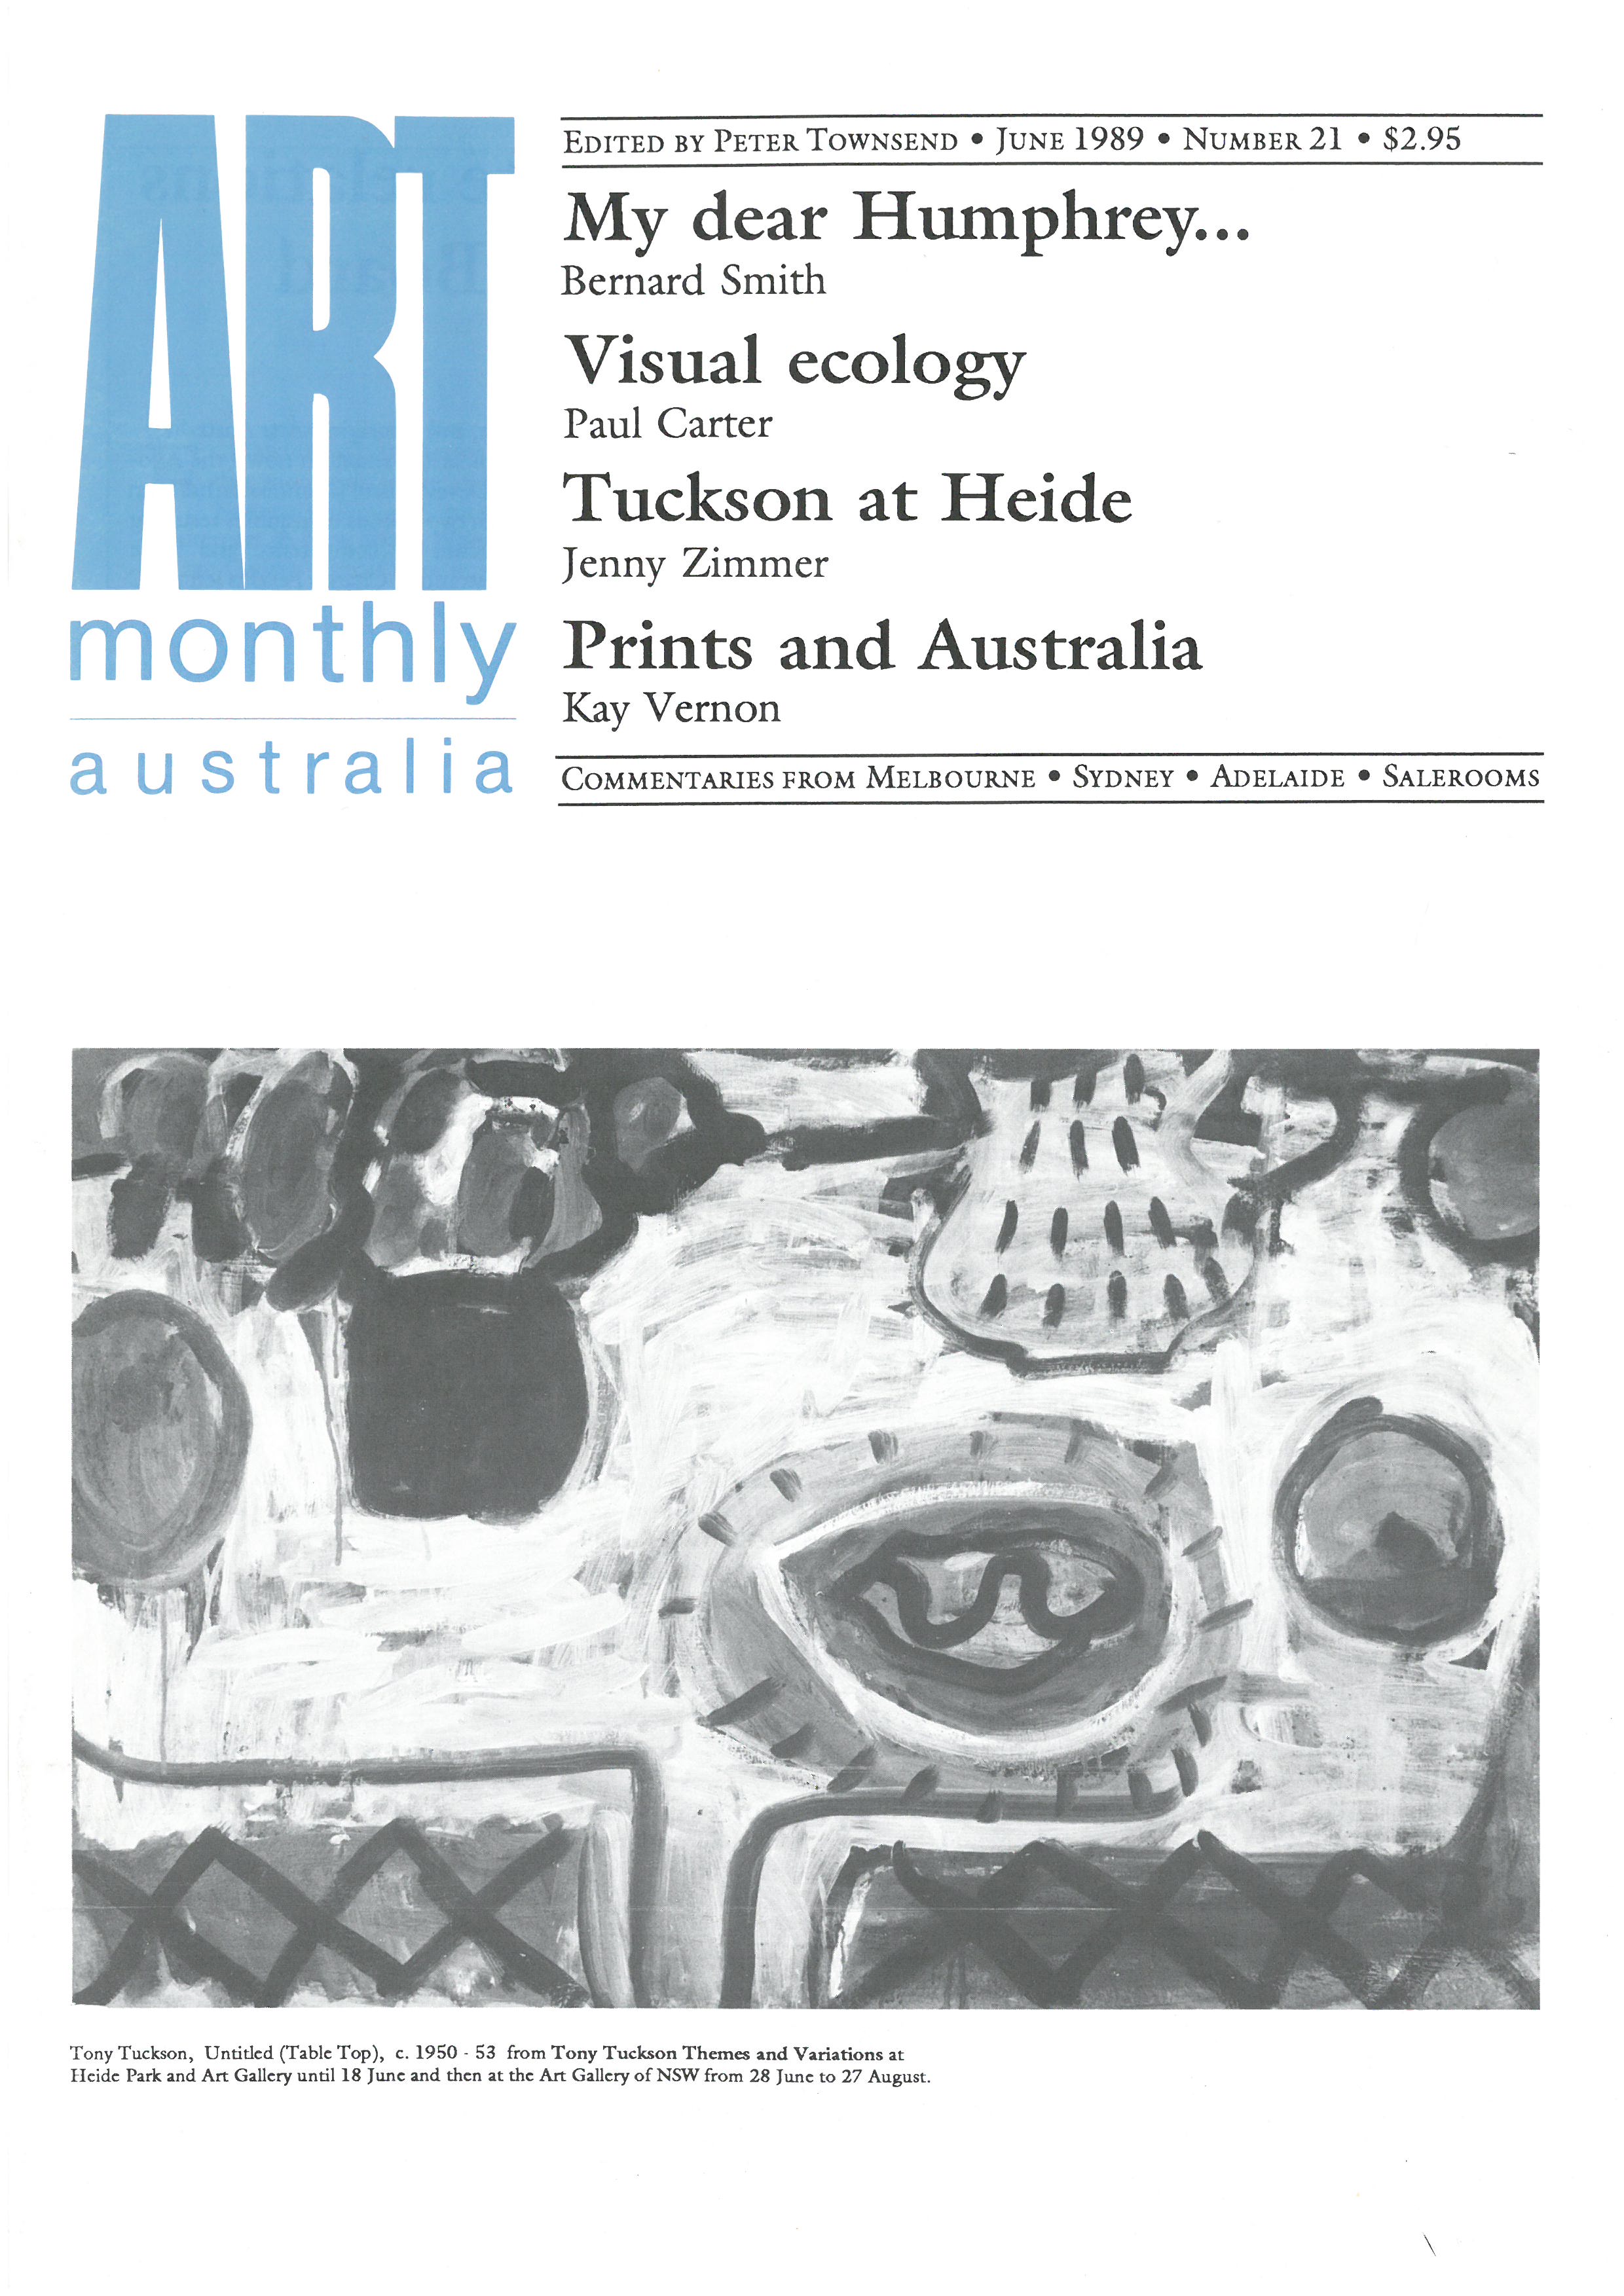 Issue 21 June 1989